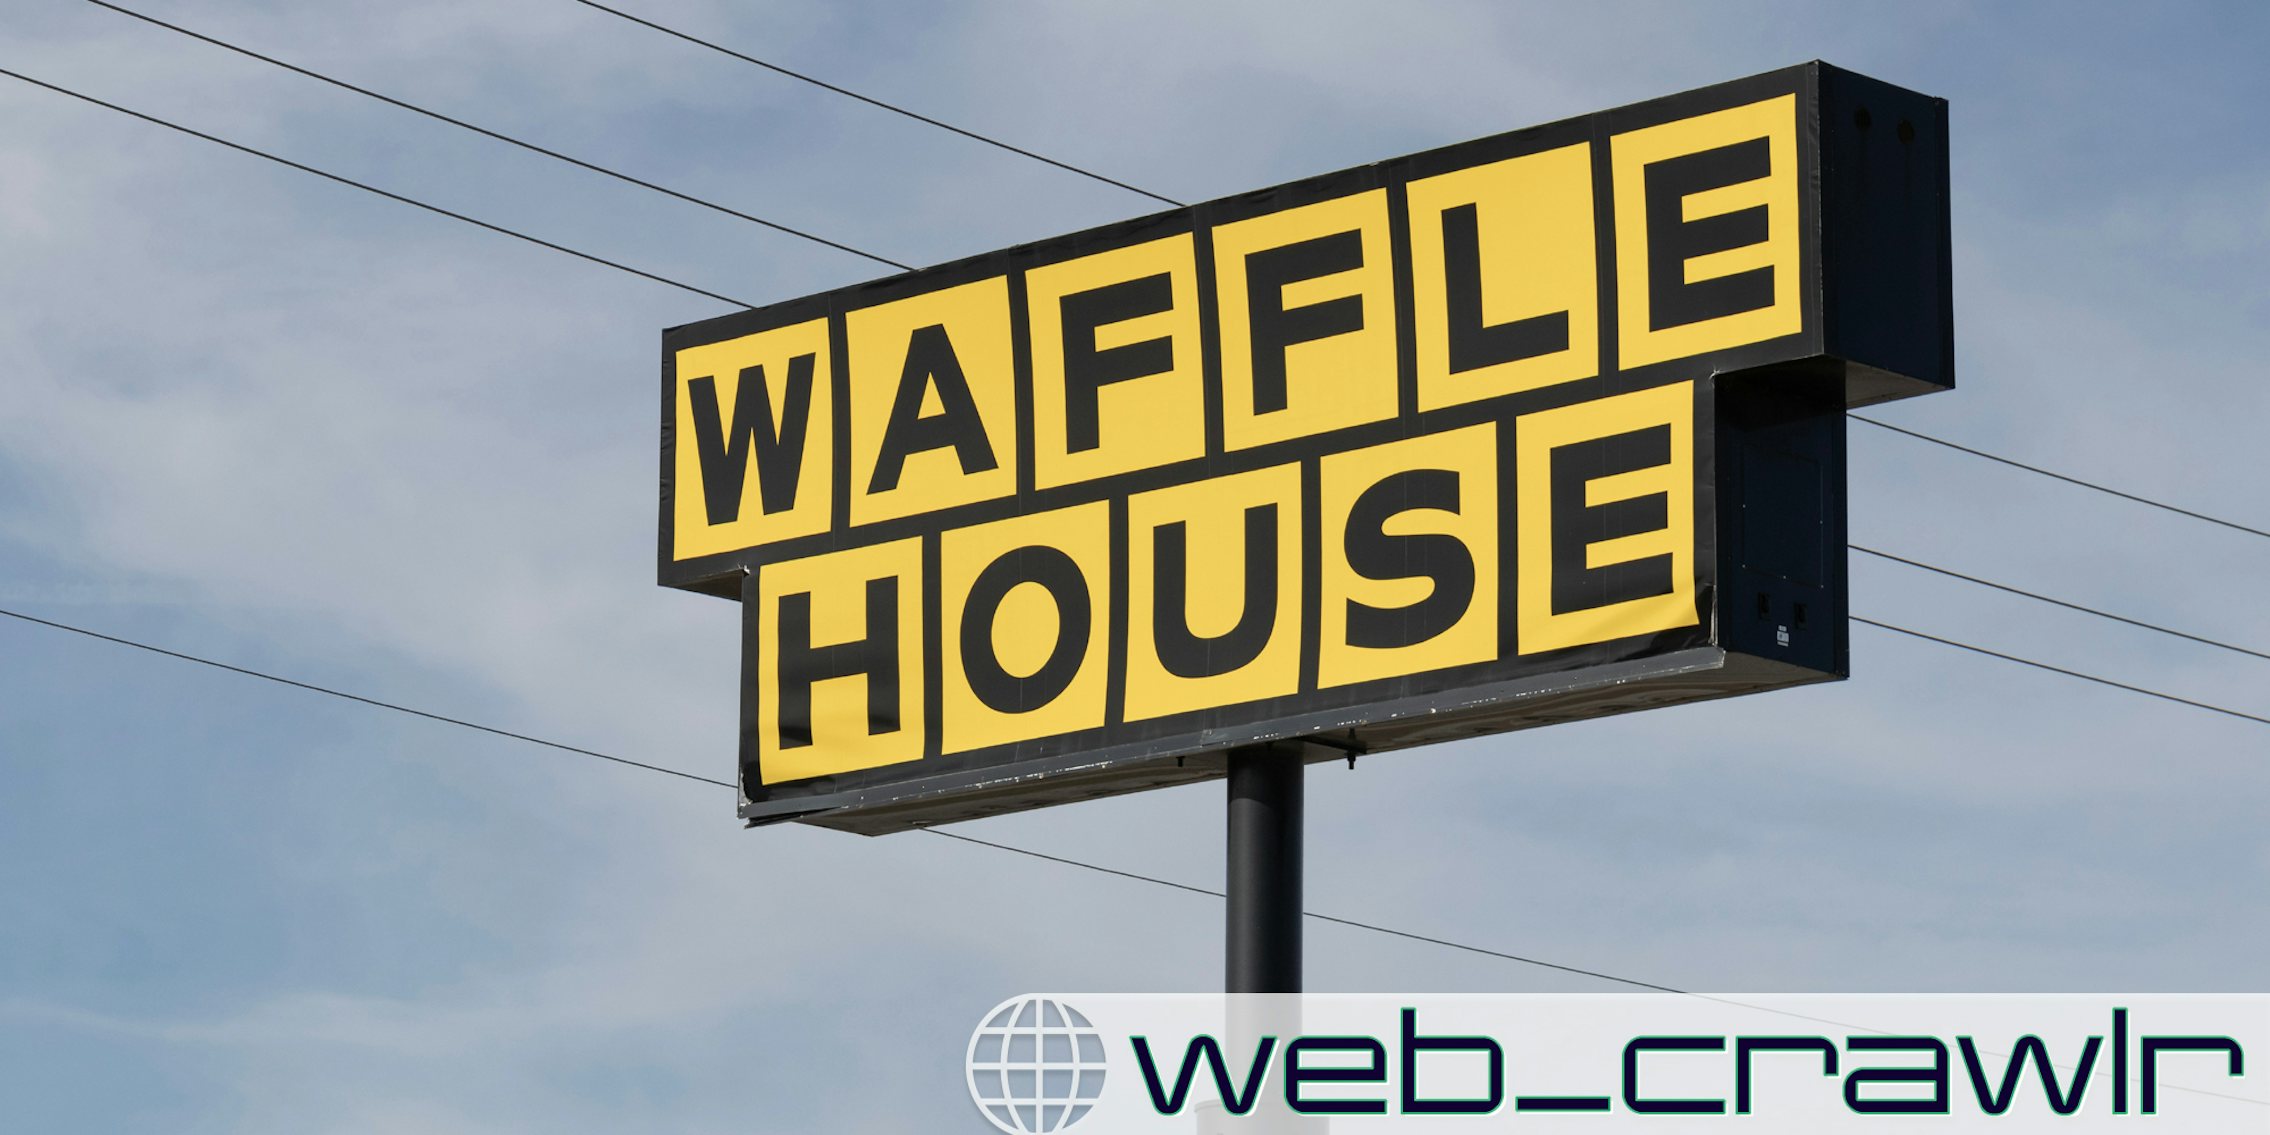 A Waffle House sign. The Daily Dot newsletter web_crawlr logo is in the bottom right corner.